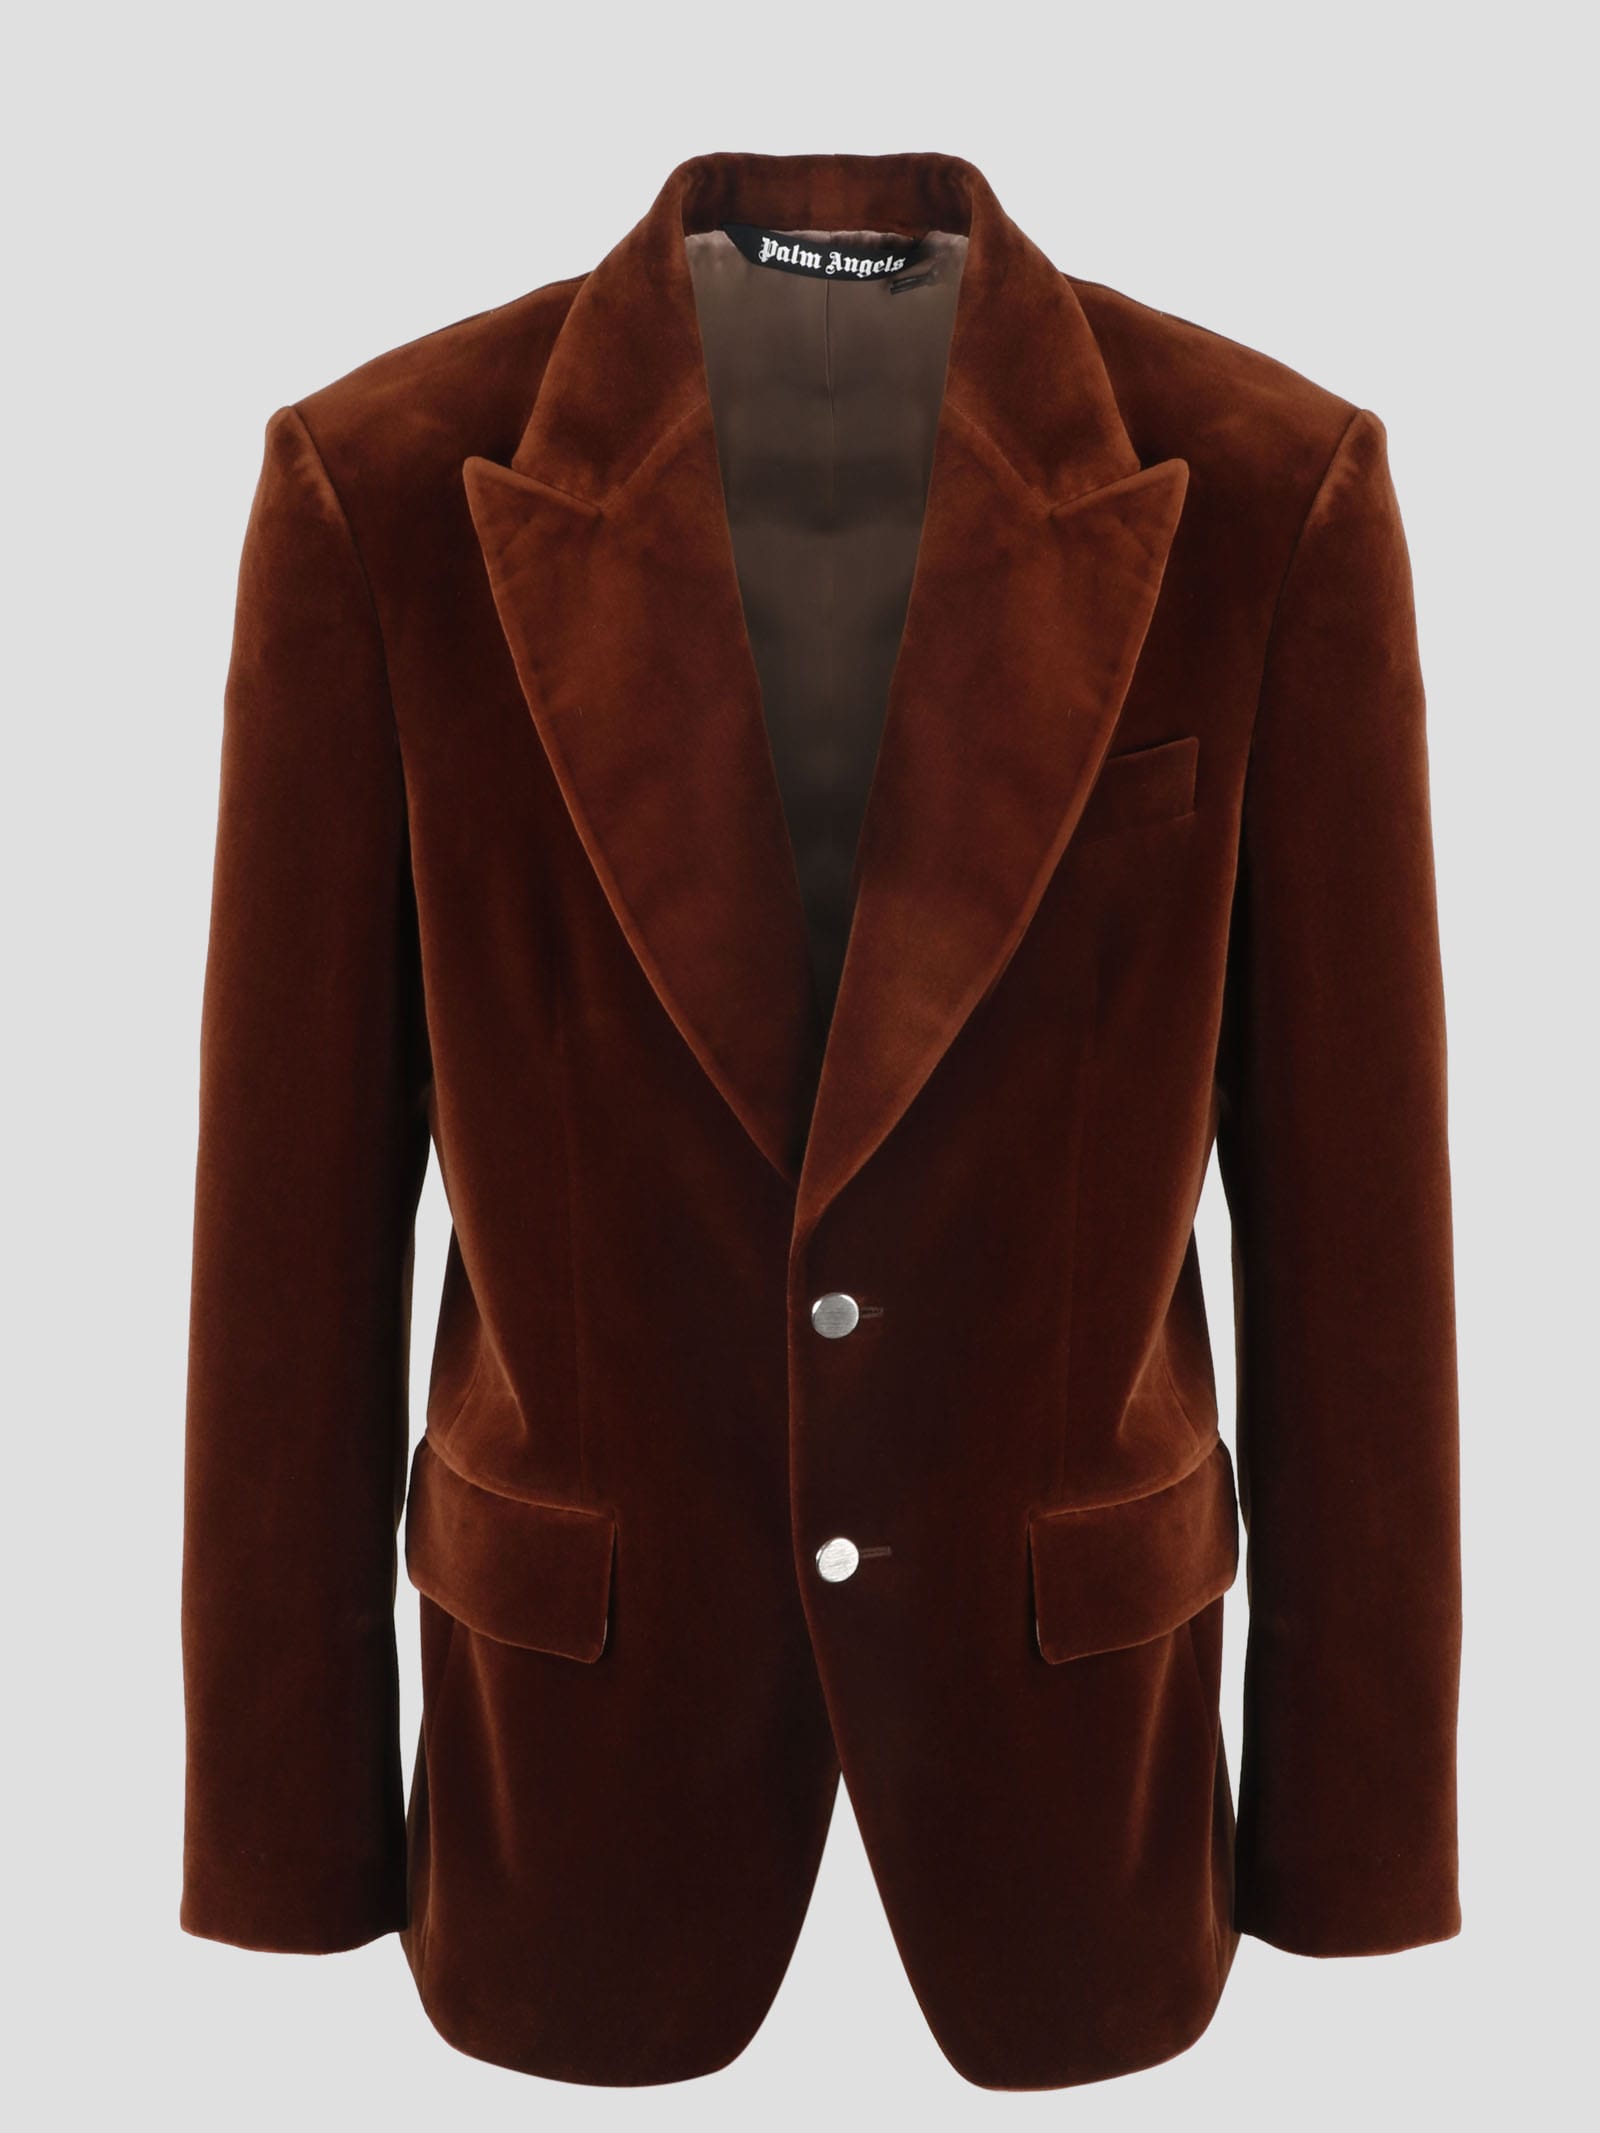 Palm Angels Single Breasted Tailored Blazer